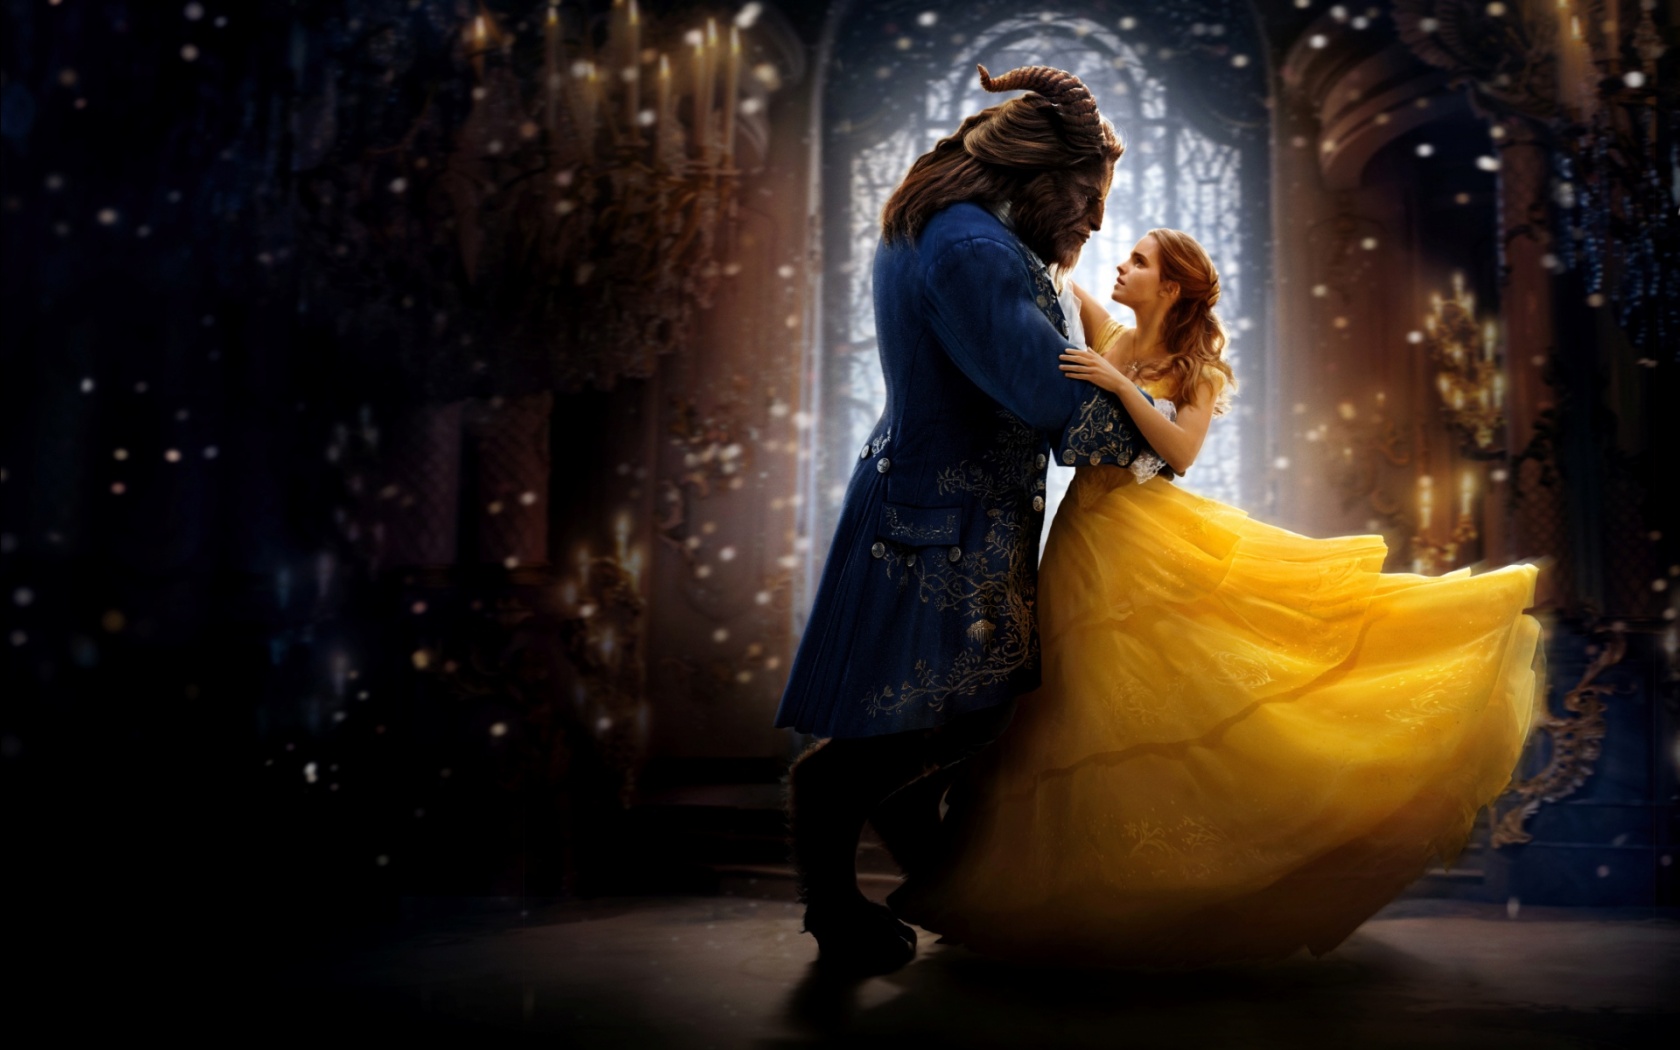 Beauty And The Beast Love 4K wallpaper | movies and tv series | Wallpaper  Better